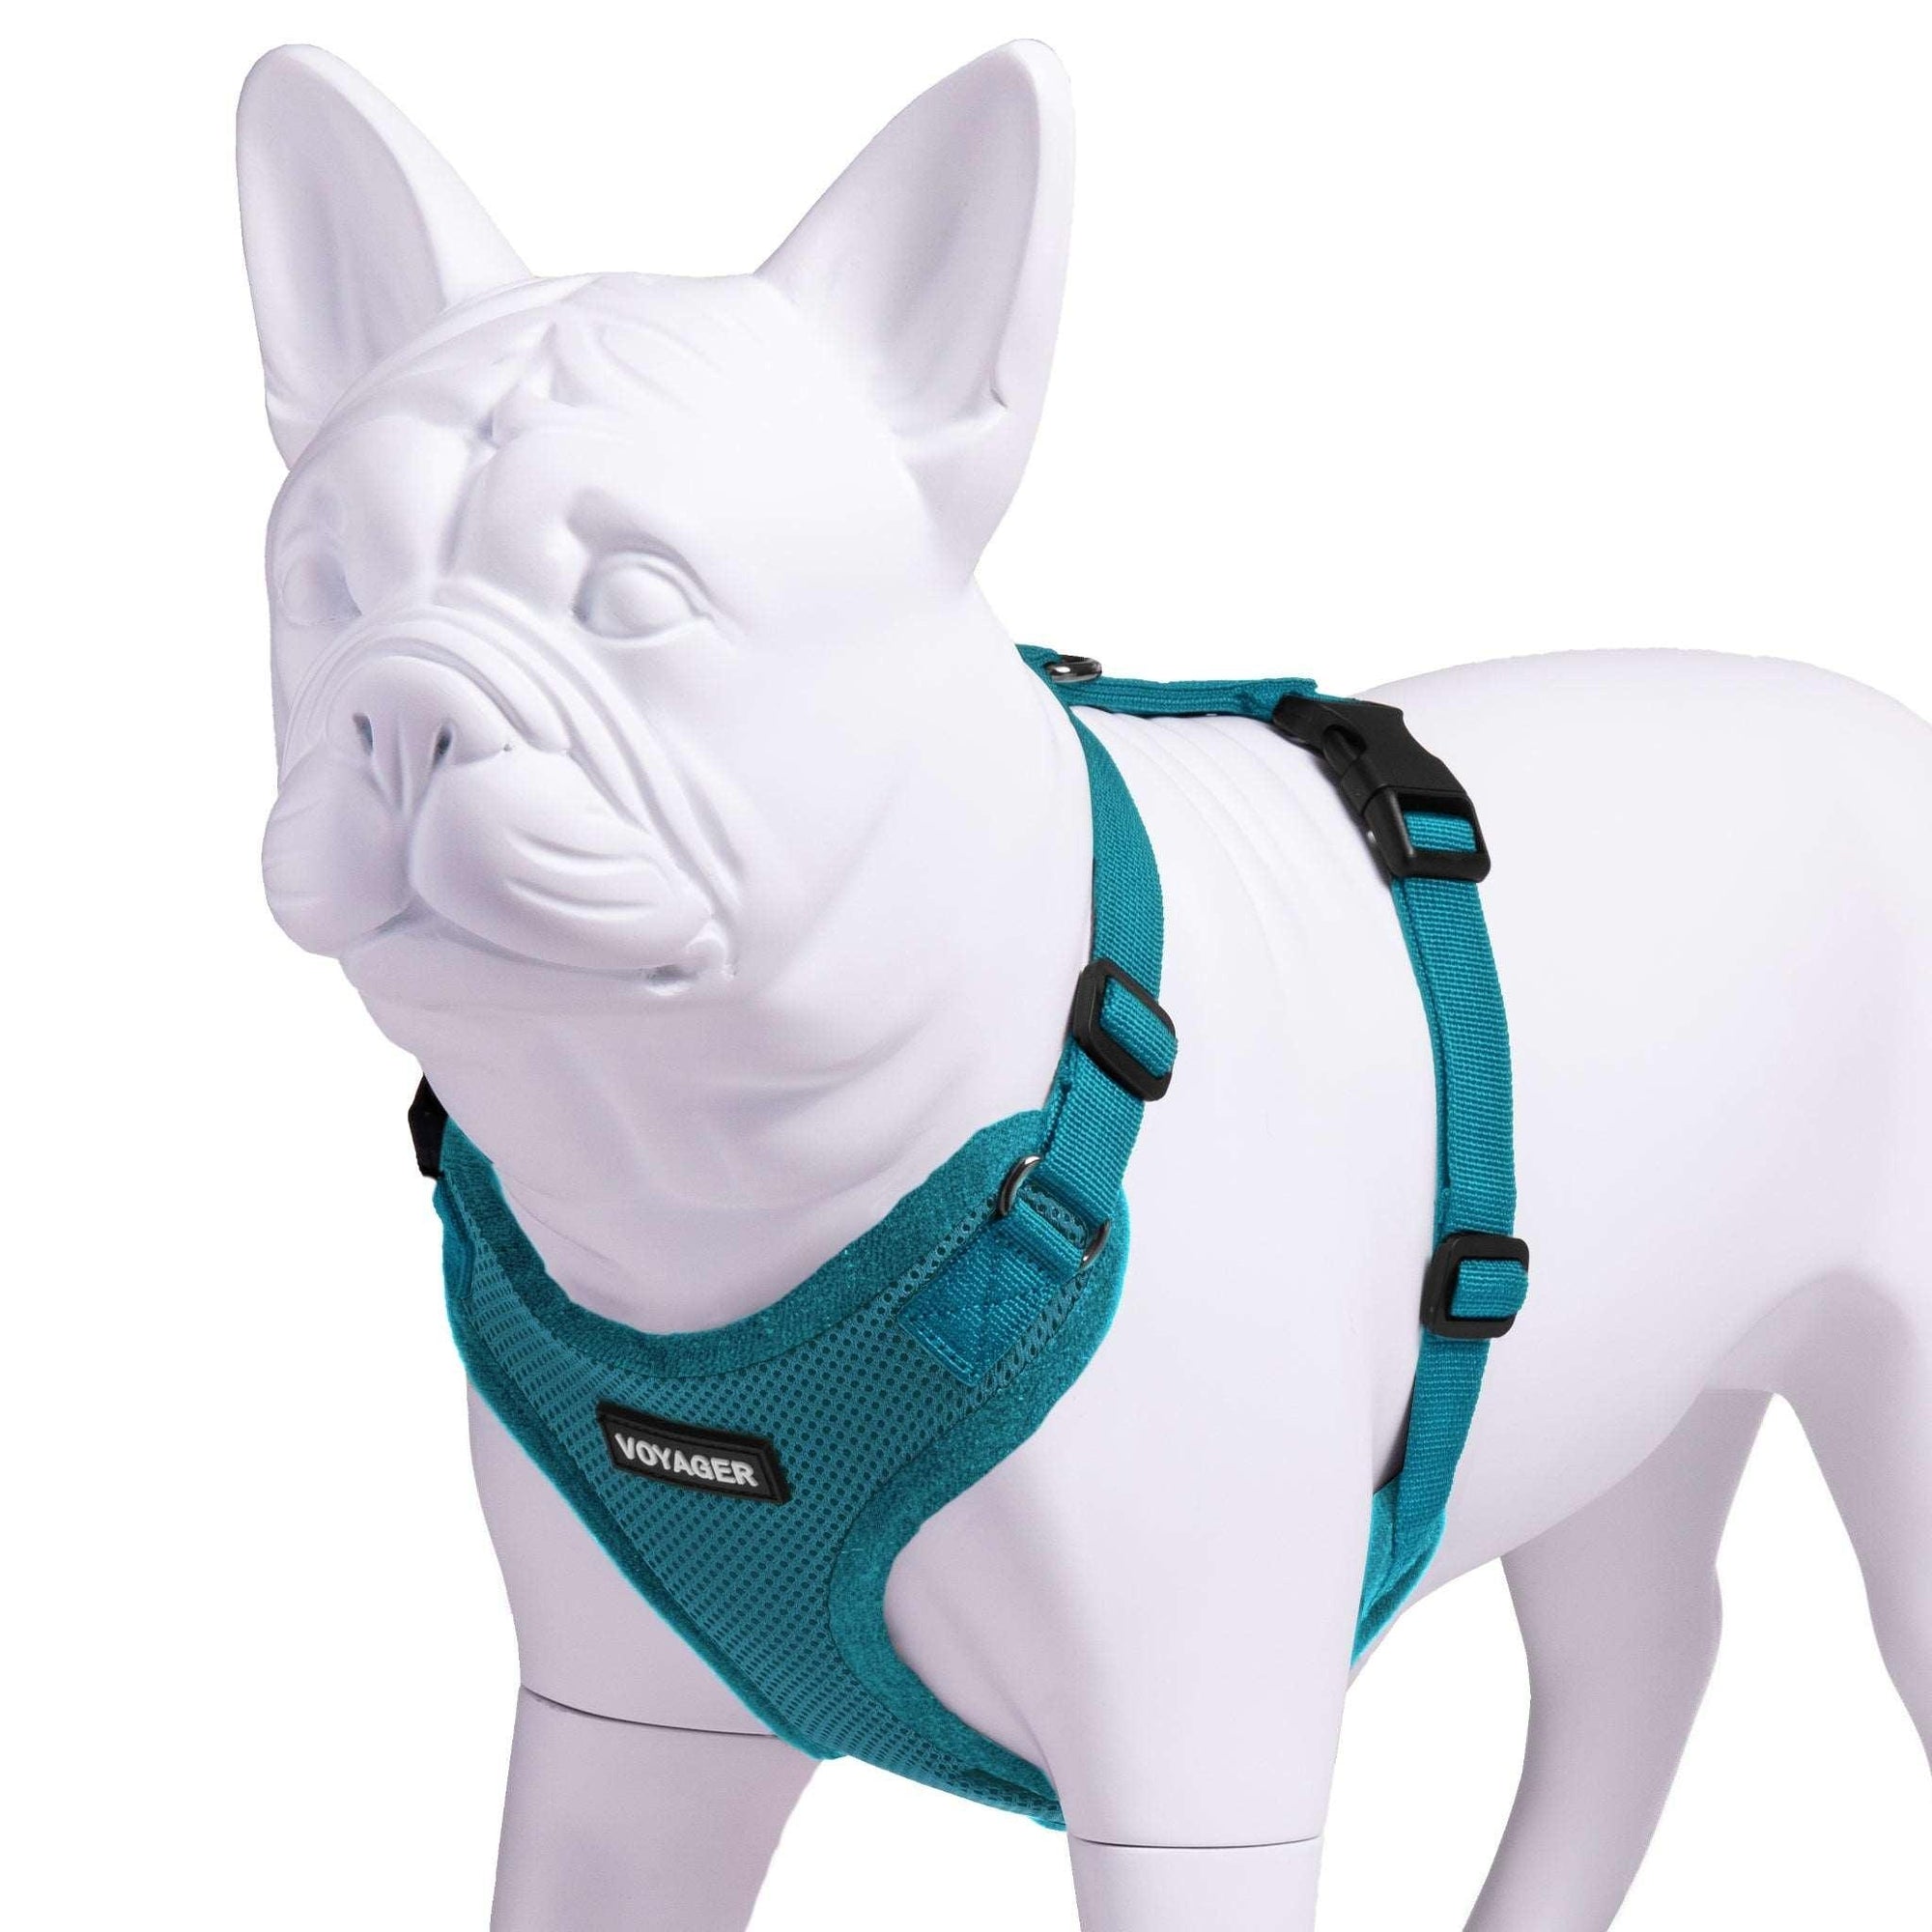 VOYAGER Step-In Lock Dog Harness in Turquoise with Matching Trim and Webbing - Expanded